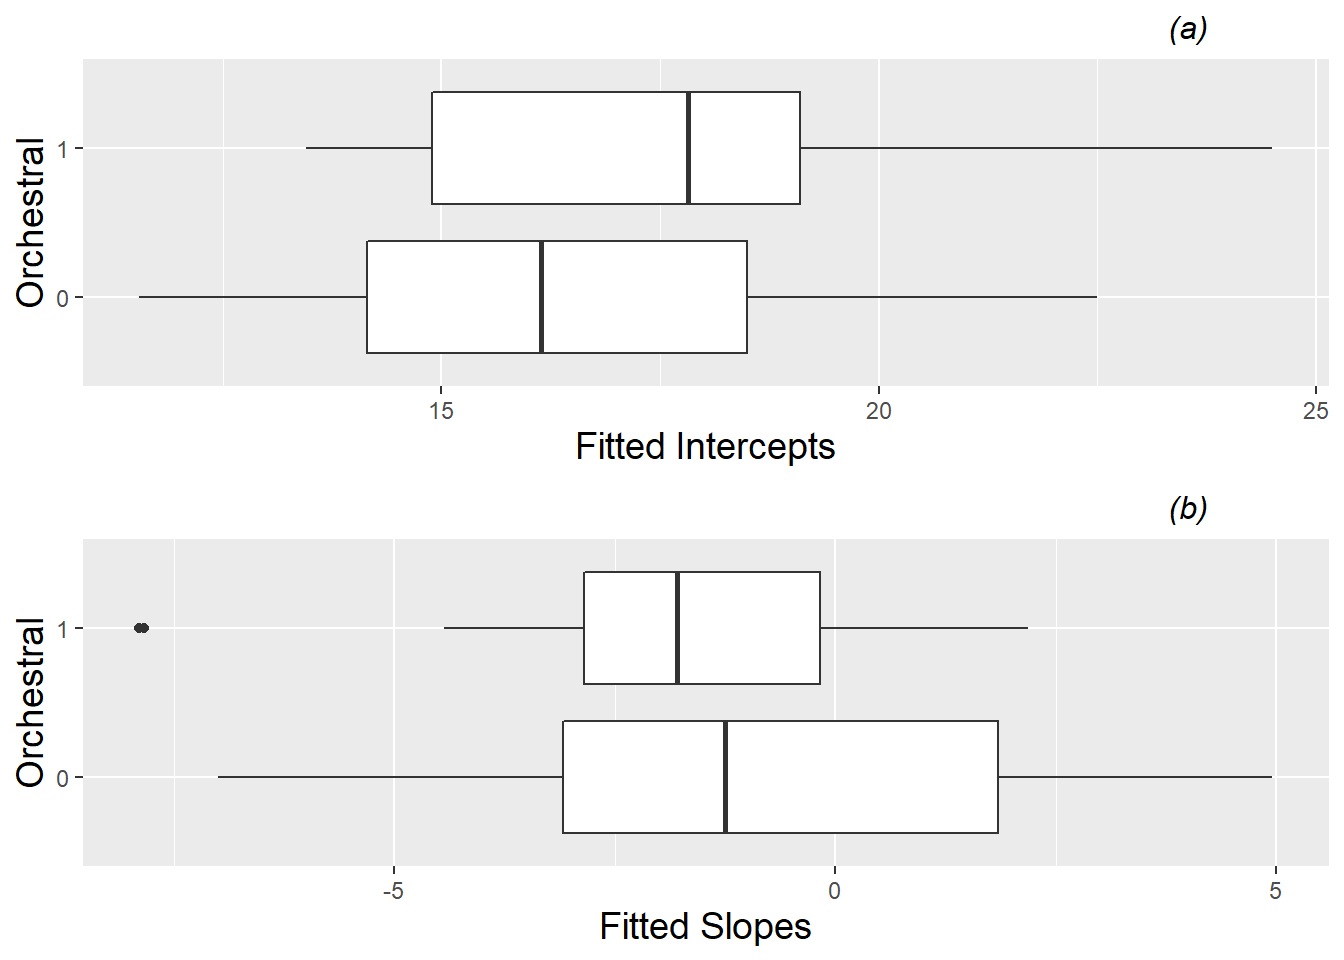 Boxplots of fitted intercepts, plot (a), and slopes, plot (b), by orchestral instrument (1) vs. keyboard or vocalist (0).